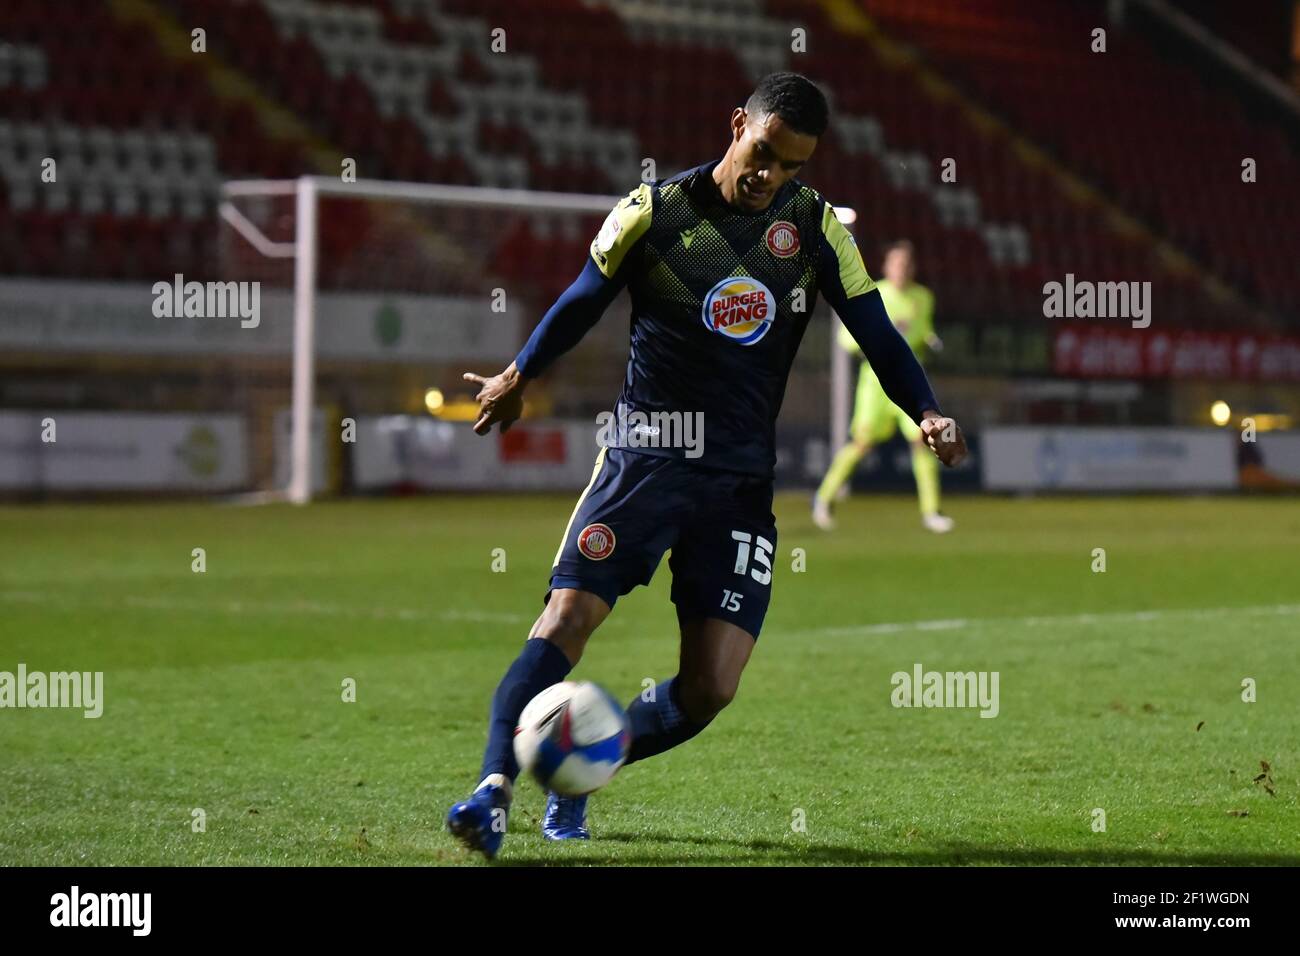 LONDON, UK. MARCH 9TH: Terence Vancooten of Stevenage in action during the Sky Bet League 2 match between Leyton Orient and Stevenage at the Matchroom Stadium, London on Tuesday 9th March 2021. (Credit: Ivan Yordanov | MI News) Credit: MI News & Sport /Alamy Live News Stock Photo